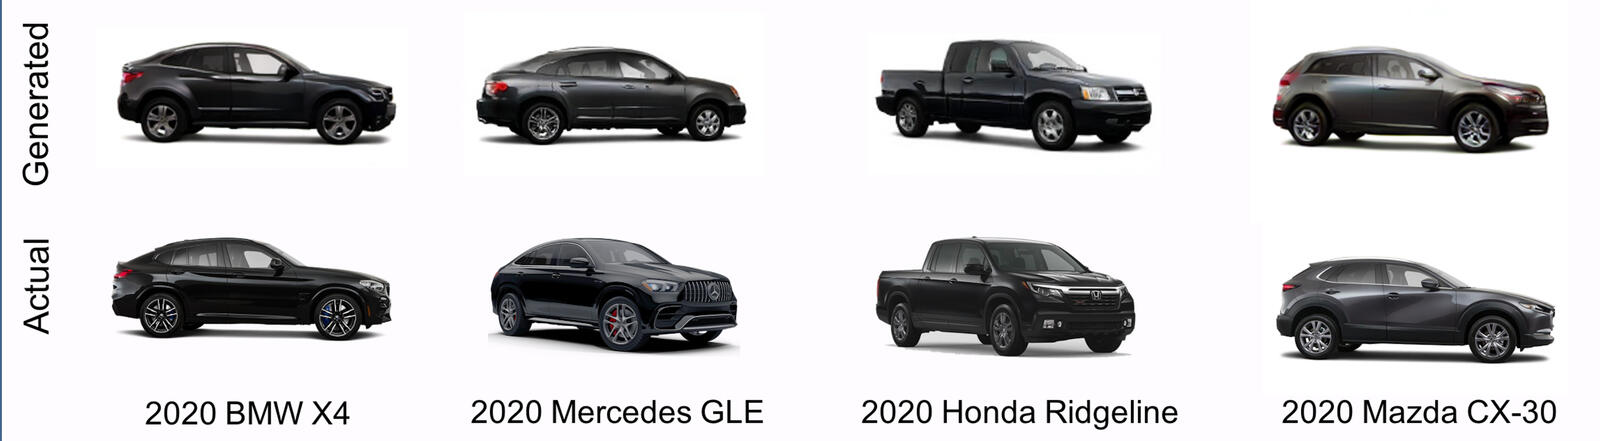 Four designs for 2020 models generated using data from 2010 to 2014, and the corresponding models that were actually released in 2020. 